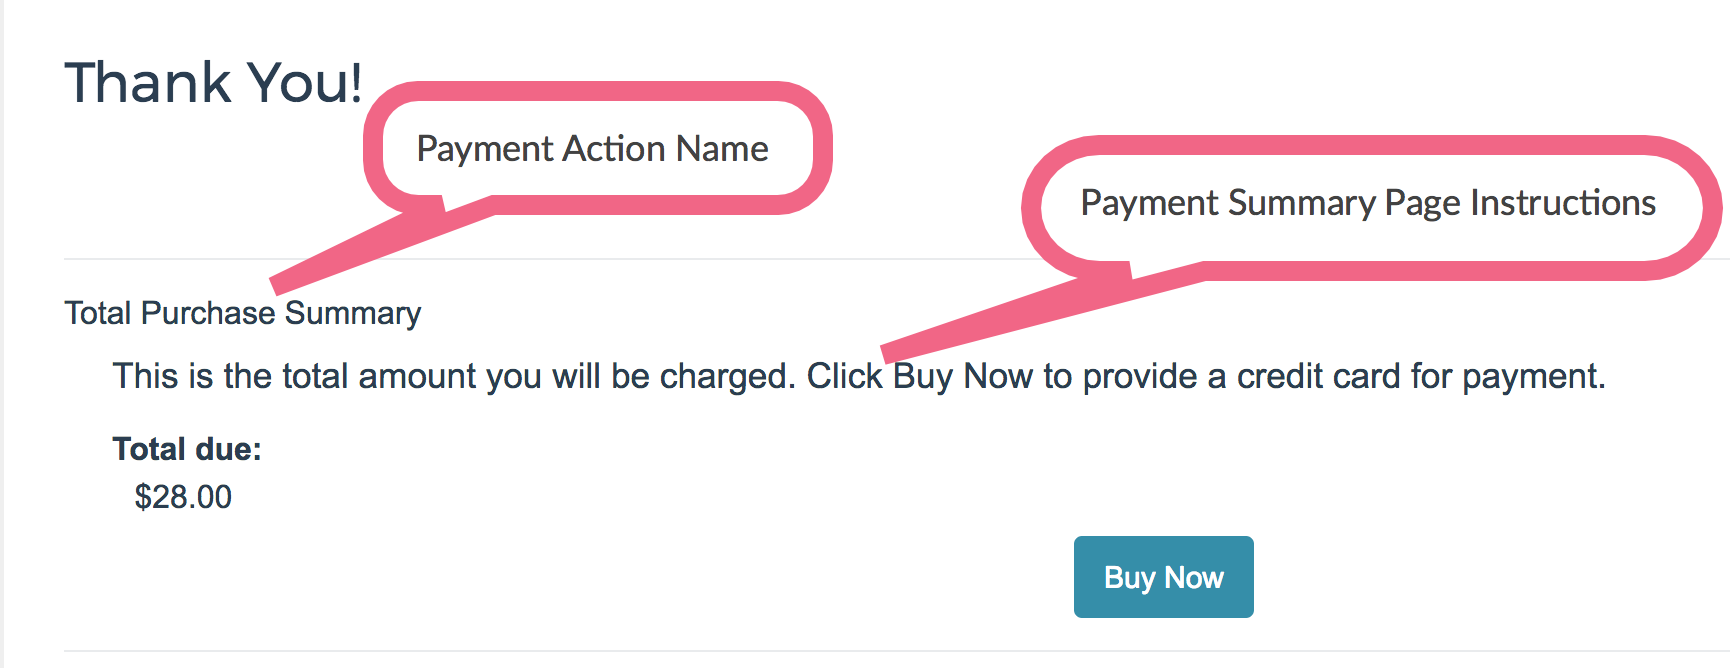 Payment Action Name and Summary Page Instructions